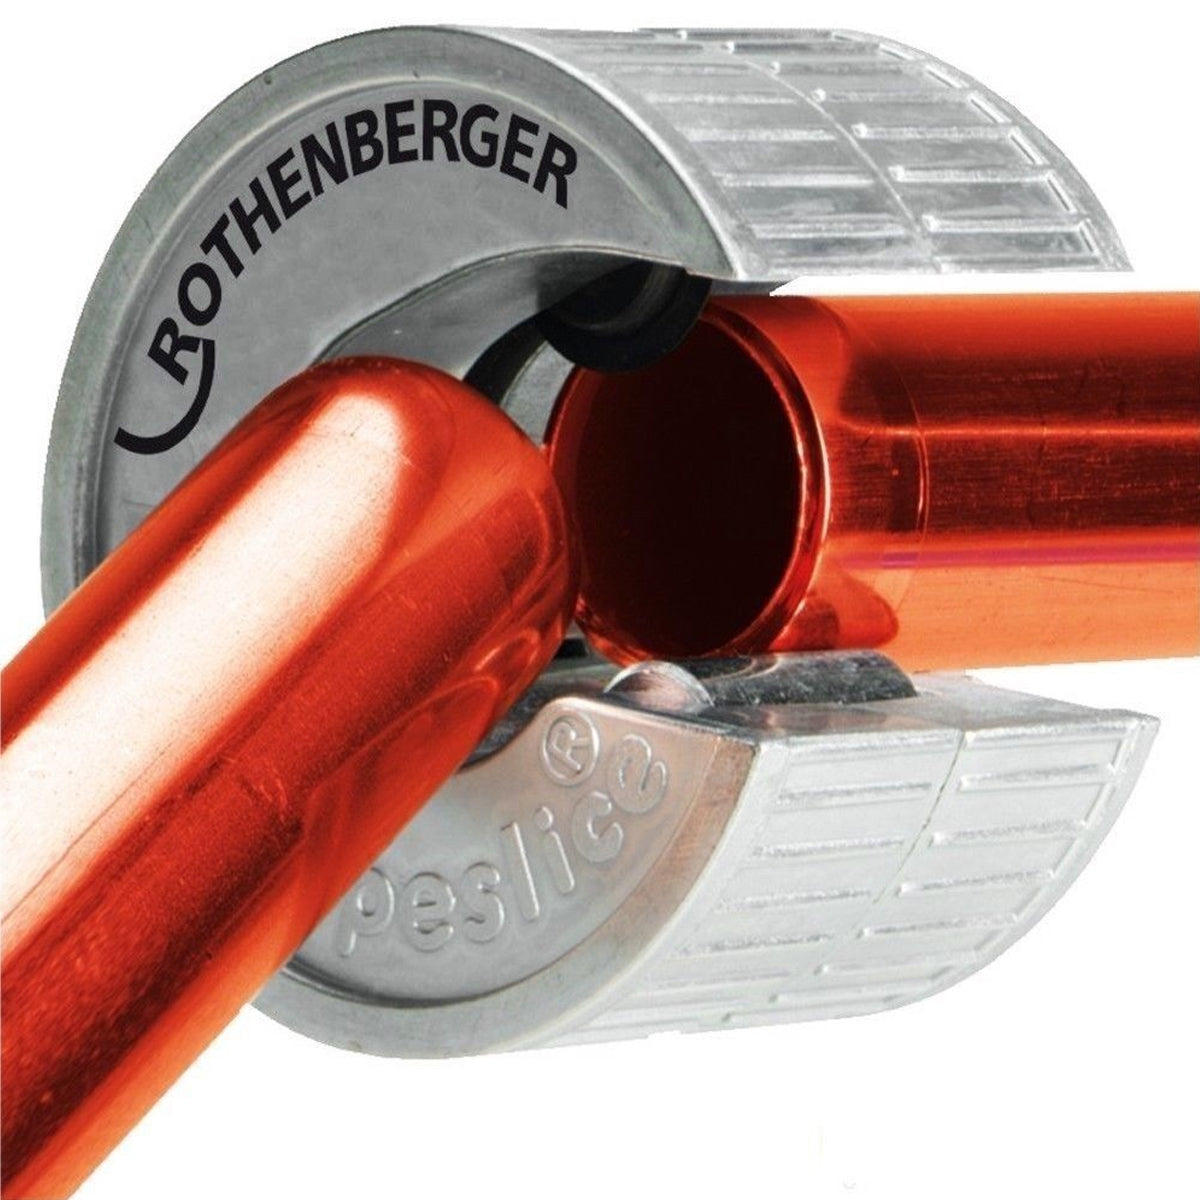 Rothenberger 22mm and 15mm Pipeslice Tube Cutter Pack of 2